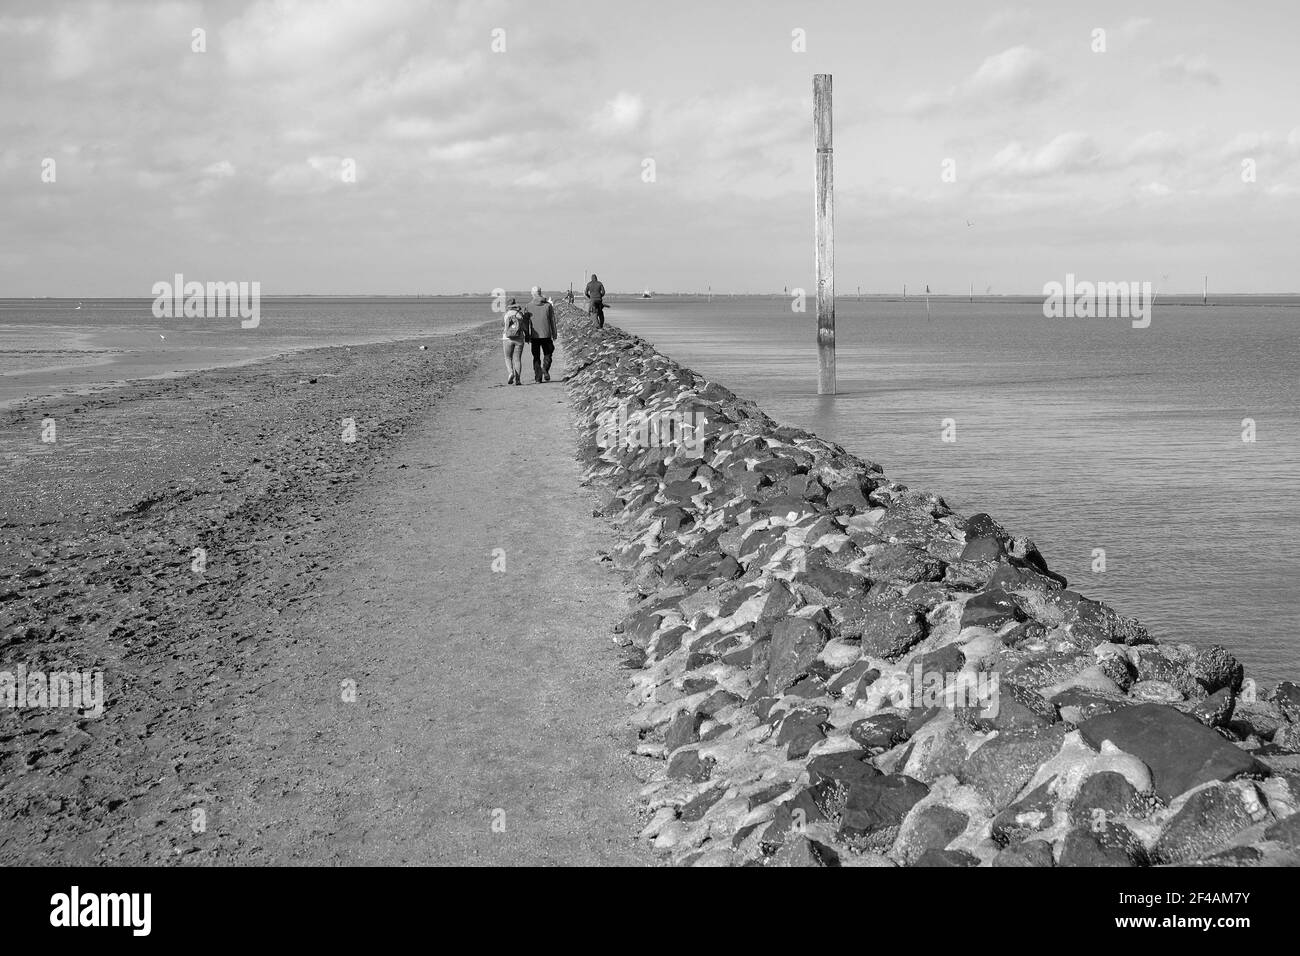 A grayscale shot of unrecognizable people walking by the coastal area against the cloudy sky Stock Photo